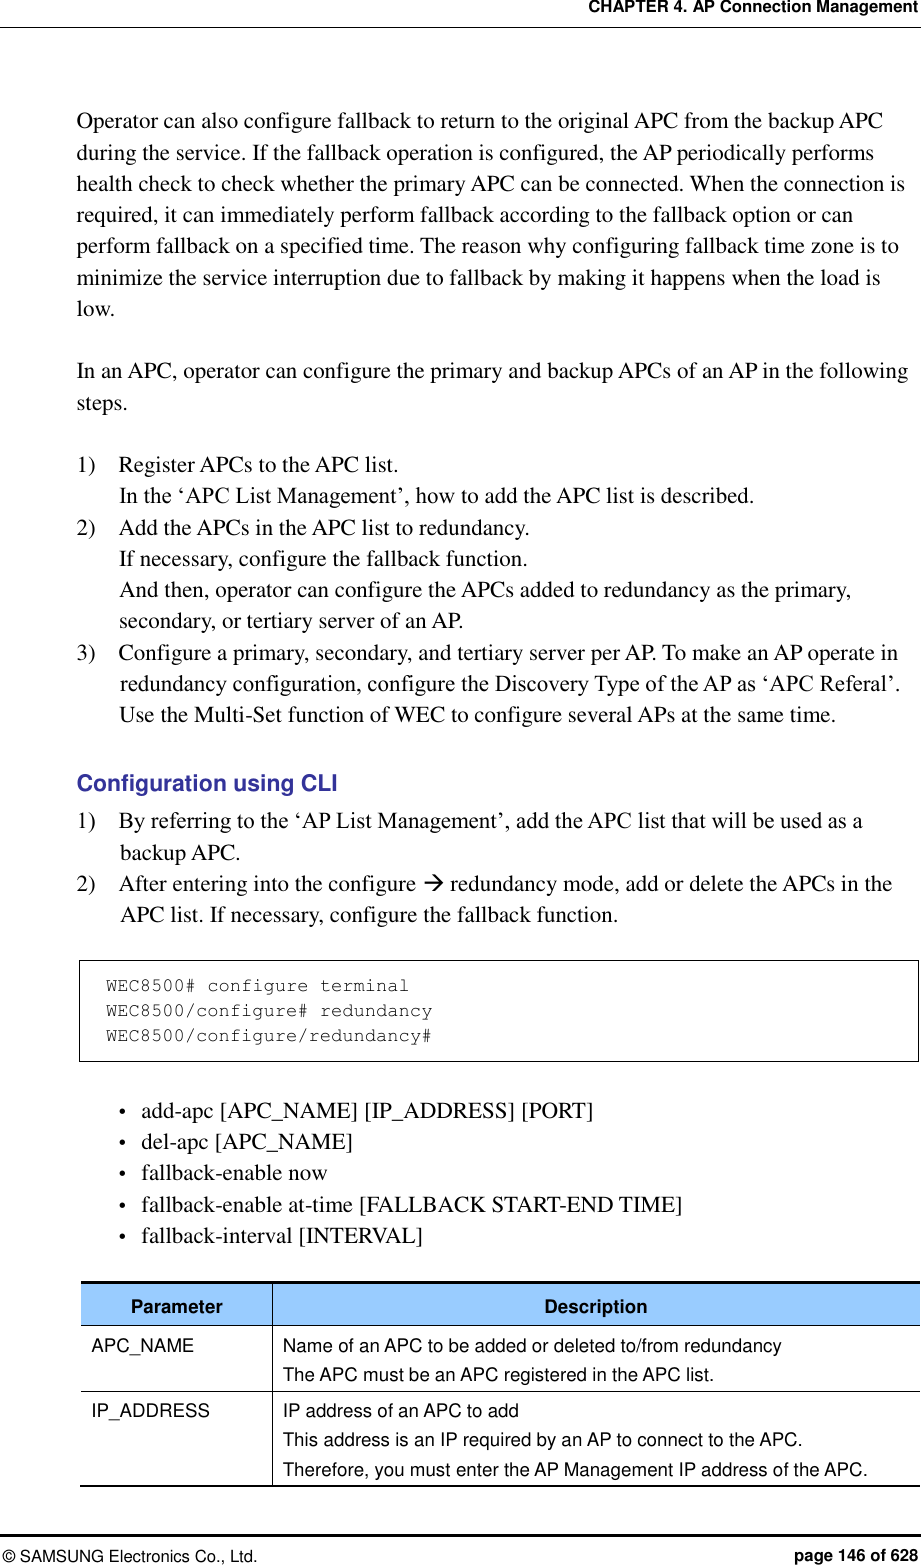 CHAPTER 4. AP Connection Management ©  SAMSUNG Electronics Co., Ltd.  page 146 of 628 Operator can also configure fallback to return to the original APC from the backup APC during the service. If the fallback operation is configured, the AP periodically performs health check to check whether the primary APC can be connected. When the connection is required, it can immediately perform fallback according to the fallback option or can perform fallback on a specified time. The reason why configuring fallback time zone is to minimize the service interruption due to fallback by making it happens when the load is low.  In an APC, operator can configure the primary and backup APCs of an AP in the following steps.  1)    Register APCs to the APC list.   In the ‘APC List Management’, how to add the APC list is described. 2)    Add the APCs in the APC list to redundancy.   If necessary, configure the fallback function. And then, operator can configure the APCs added to redundancy as the primary, secondary, or tertiary server of an AP. 3)    Configure a primary, secondary, and tertiary server per AP. To make an AP operate in redundancy configuration, configure the Discovery Type of the AP as ‘APC Referal’. Use the Multi-Set function of WEC to configure several APs at the same time.    Configuration using CLI 1)    By referring to the ‘AP List Management’, add the APC list that will be used as a backup APC. 2)    After entering into the configure  redundancy mode, add or delete the APCs in the APC list. If necessary, configure the fallback function.    WEC8500# configure terminal WEC8500/configure# redundancy WEC8500/configure/redundancy#    add-apc [APC_NAME] [IP_ADDRESS] [PORT]  del-apc [APC_NAME]  fallback-enable now    fallback-enable at-time [FALLBACK START-END TIME]  fallback-interval [INTERVAL]  Parameter Description APC_NAME Name of an APC to be added or deleted to/from redundancy The APC must be an APC registered in the APC list. IP_ADDRESS IP address of an APC to add This address is an IP required by an AP to connect to the APC. Therefore, you must enter the AP Management IP address of the APC. 